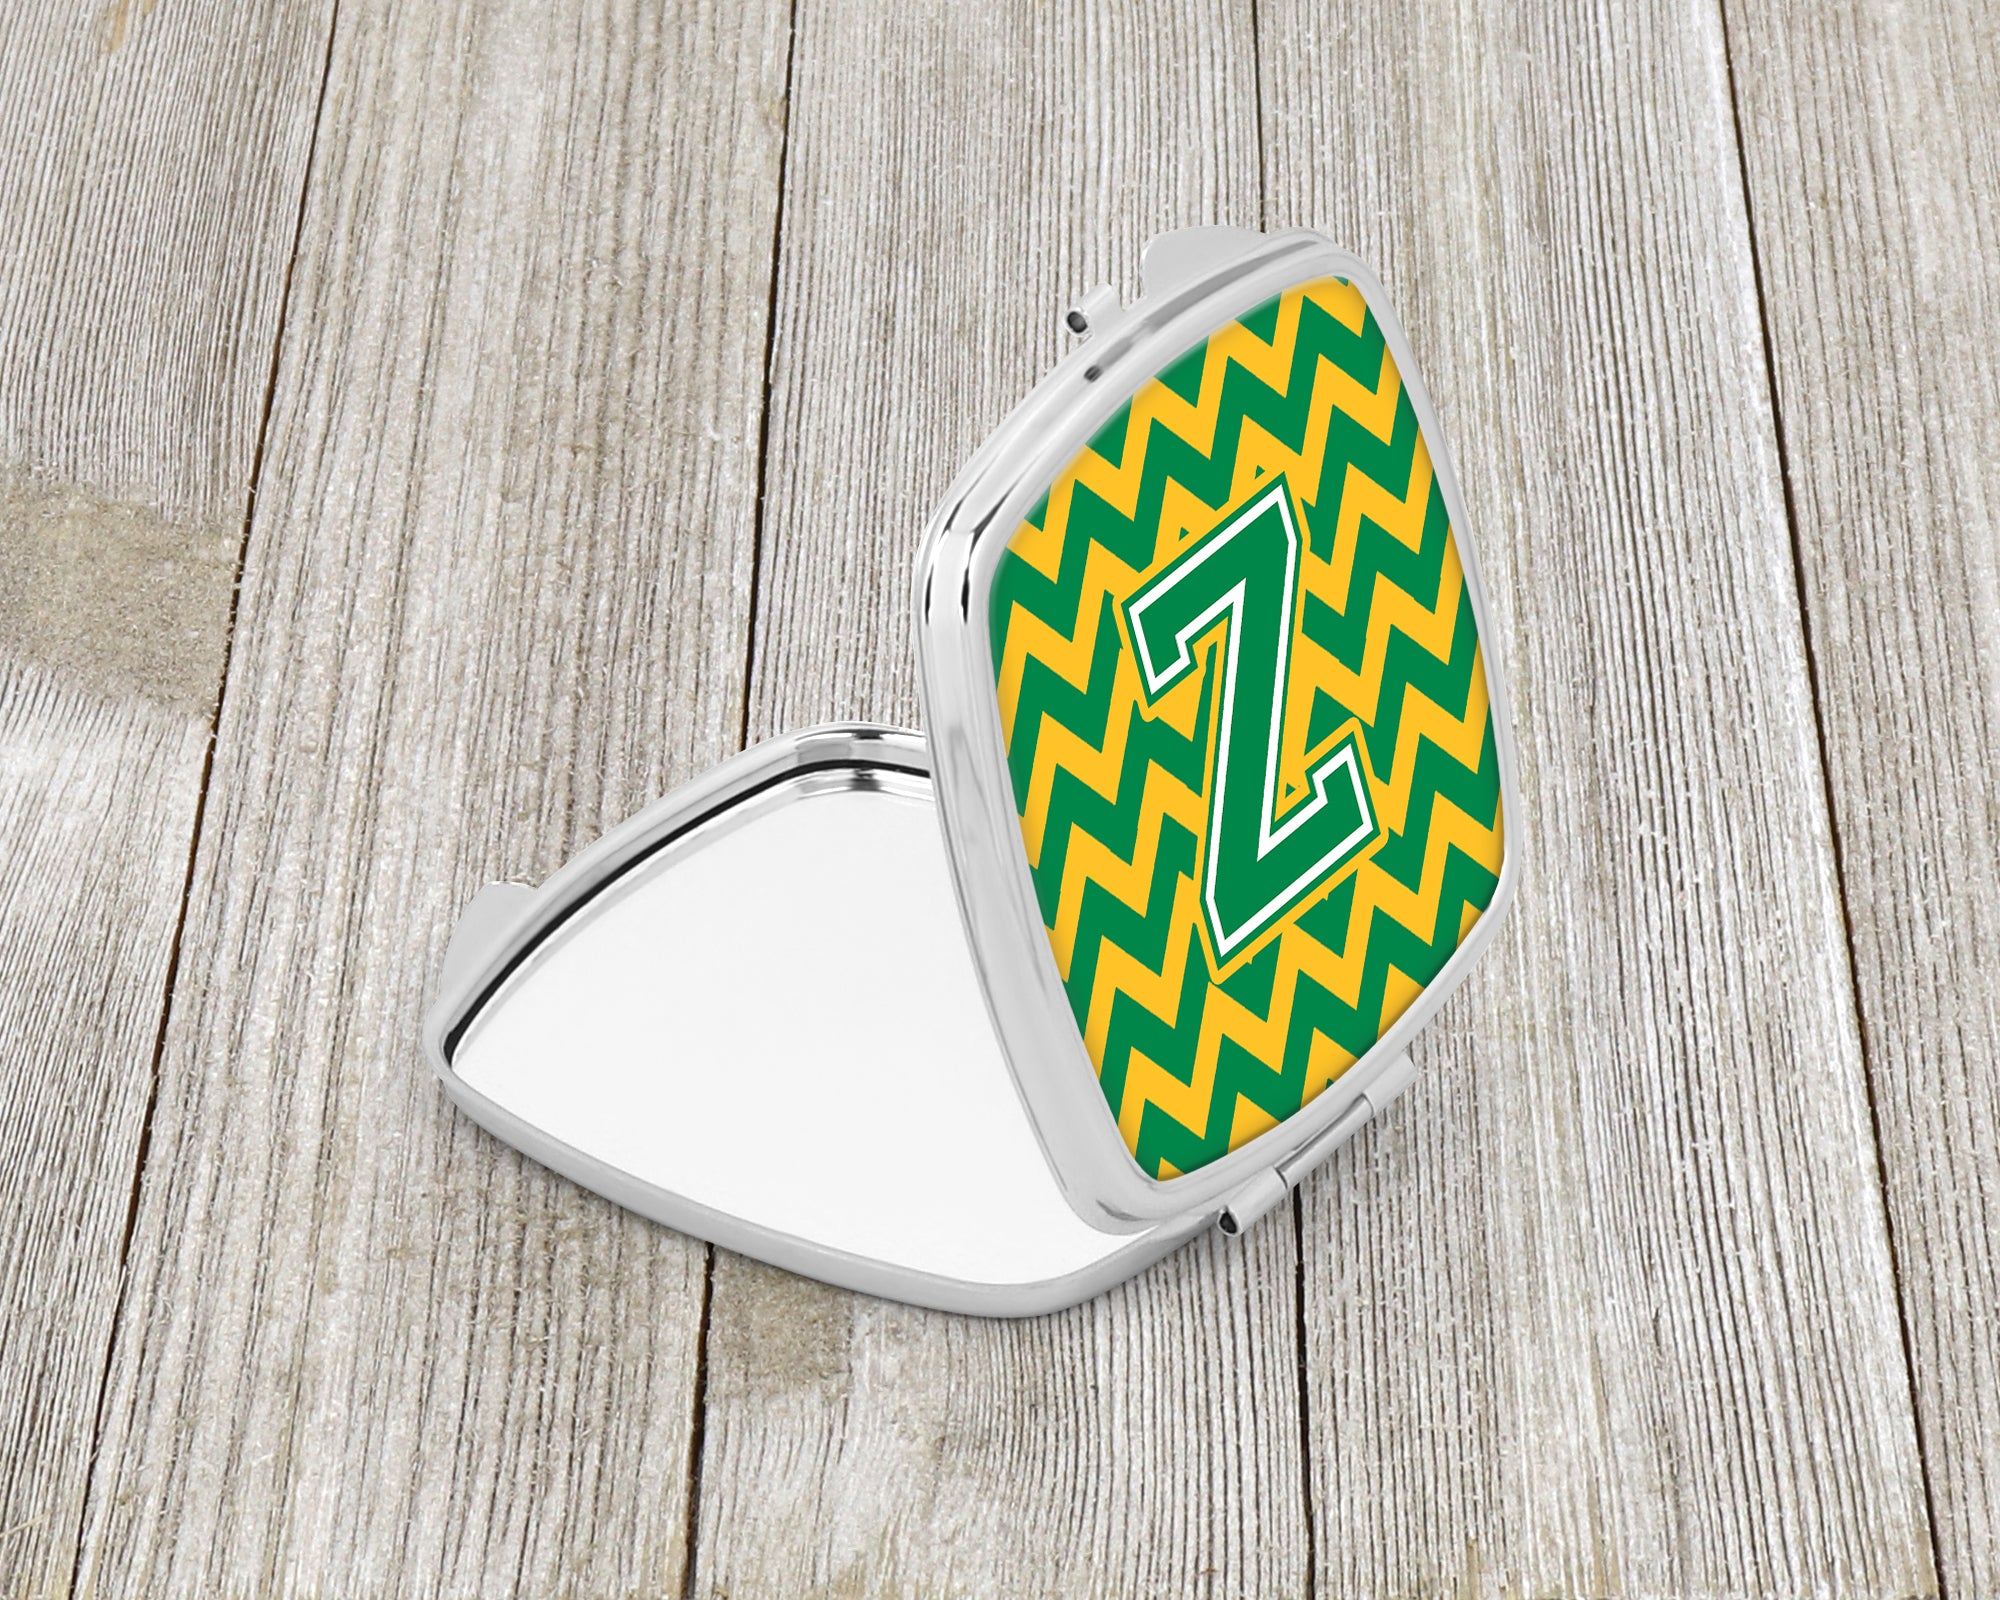 Letter Z Chevron Green and Gold Compact Mirror CJ1059-ZSCM